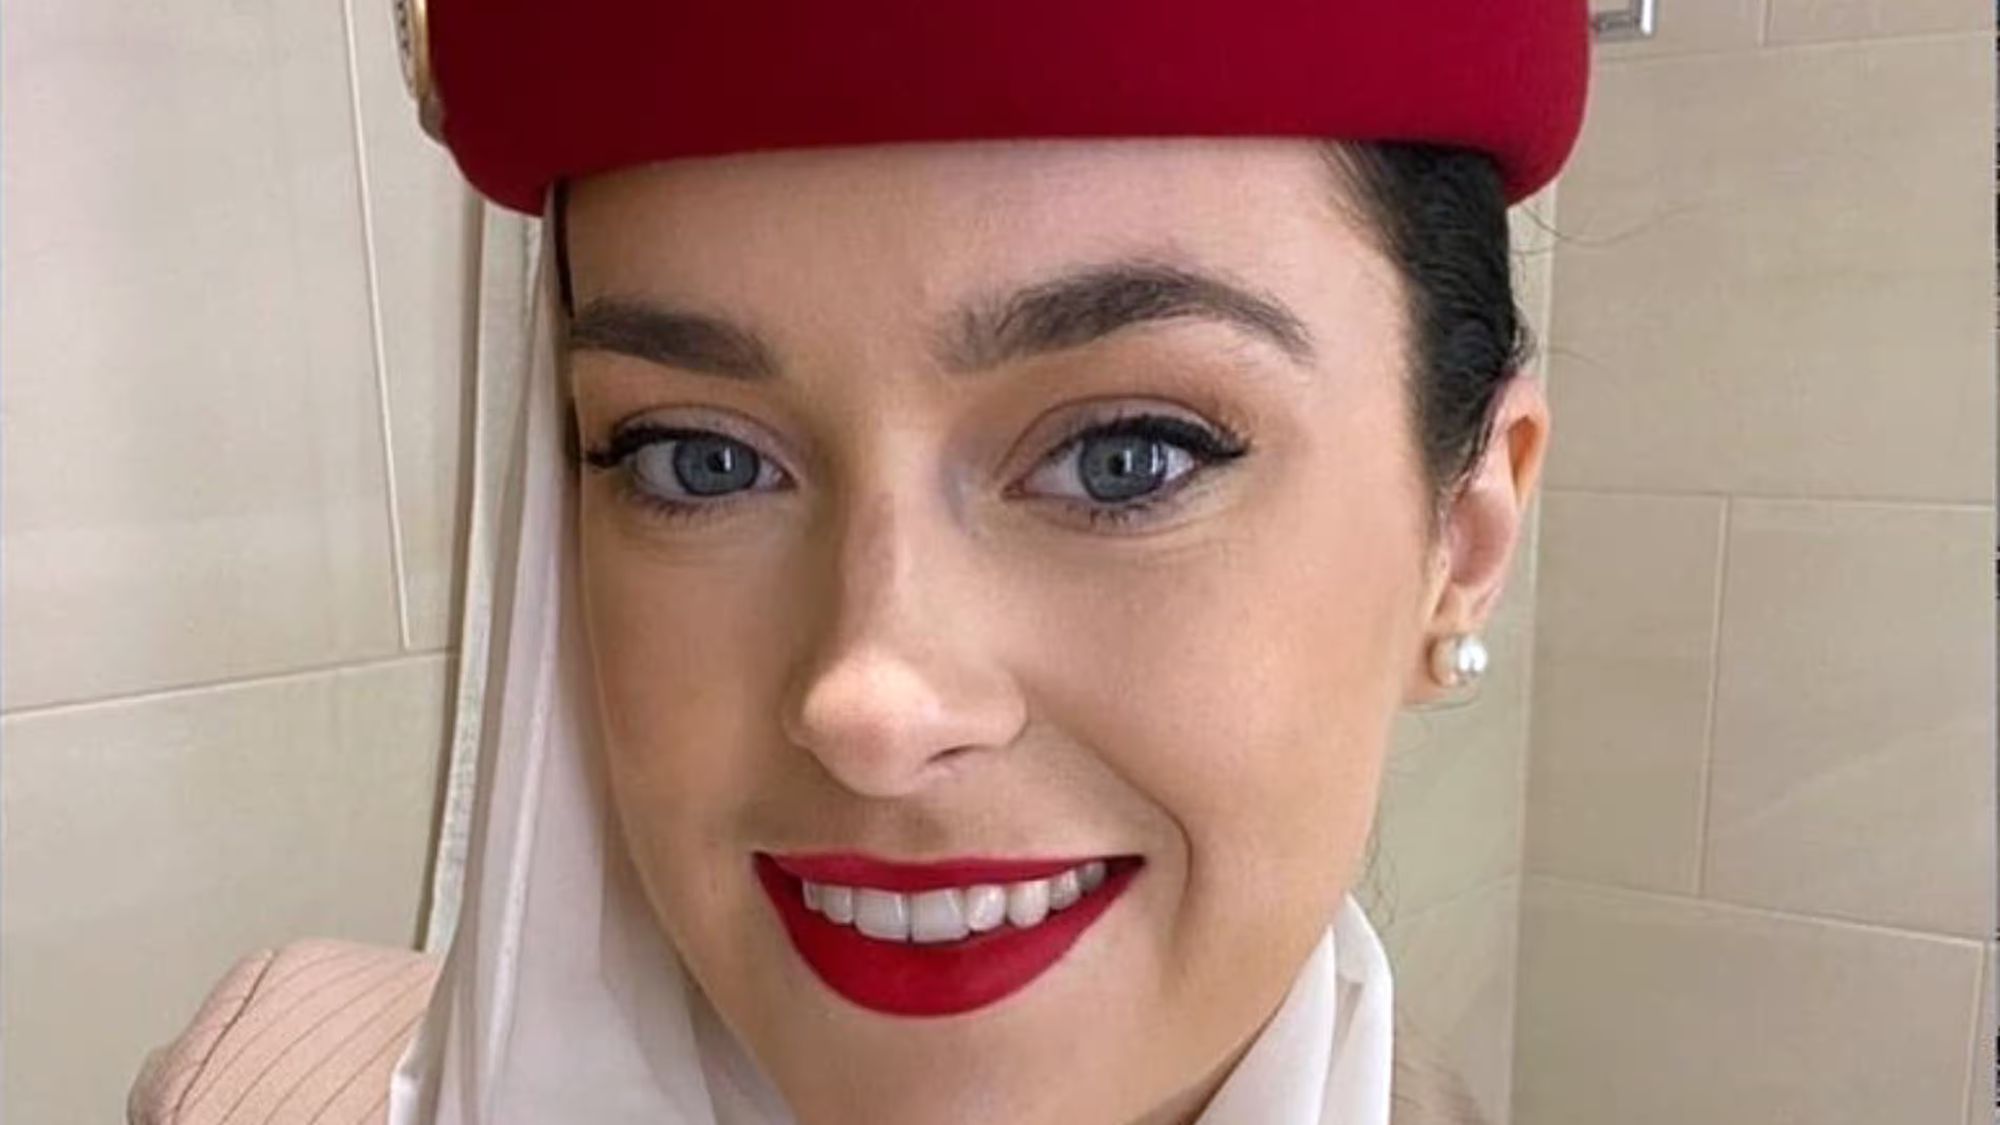  Irish flight attendant breaks silence after 'distressing' Dubai charges dropped 